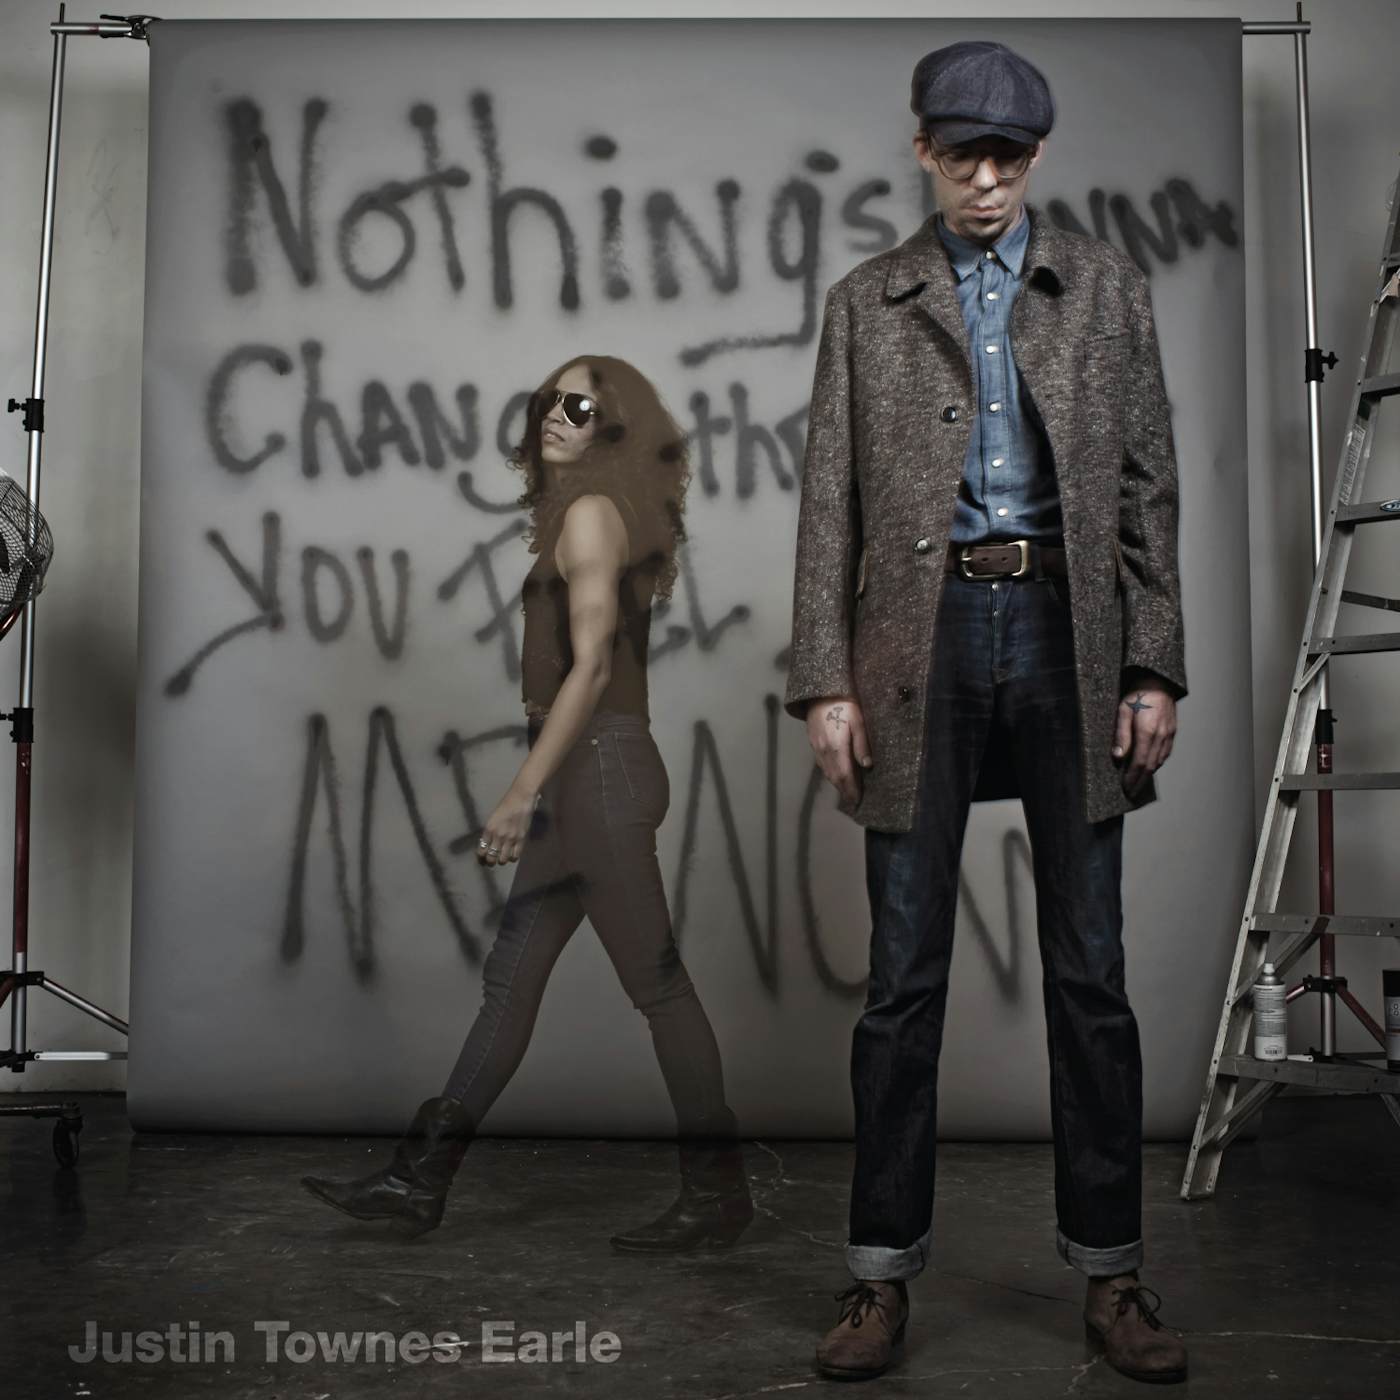 Justin Townes Earle NOTHINGS GOING TO CHANGE THE WAY YOU FEEL ABOUT CD